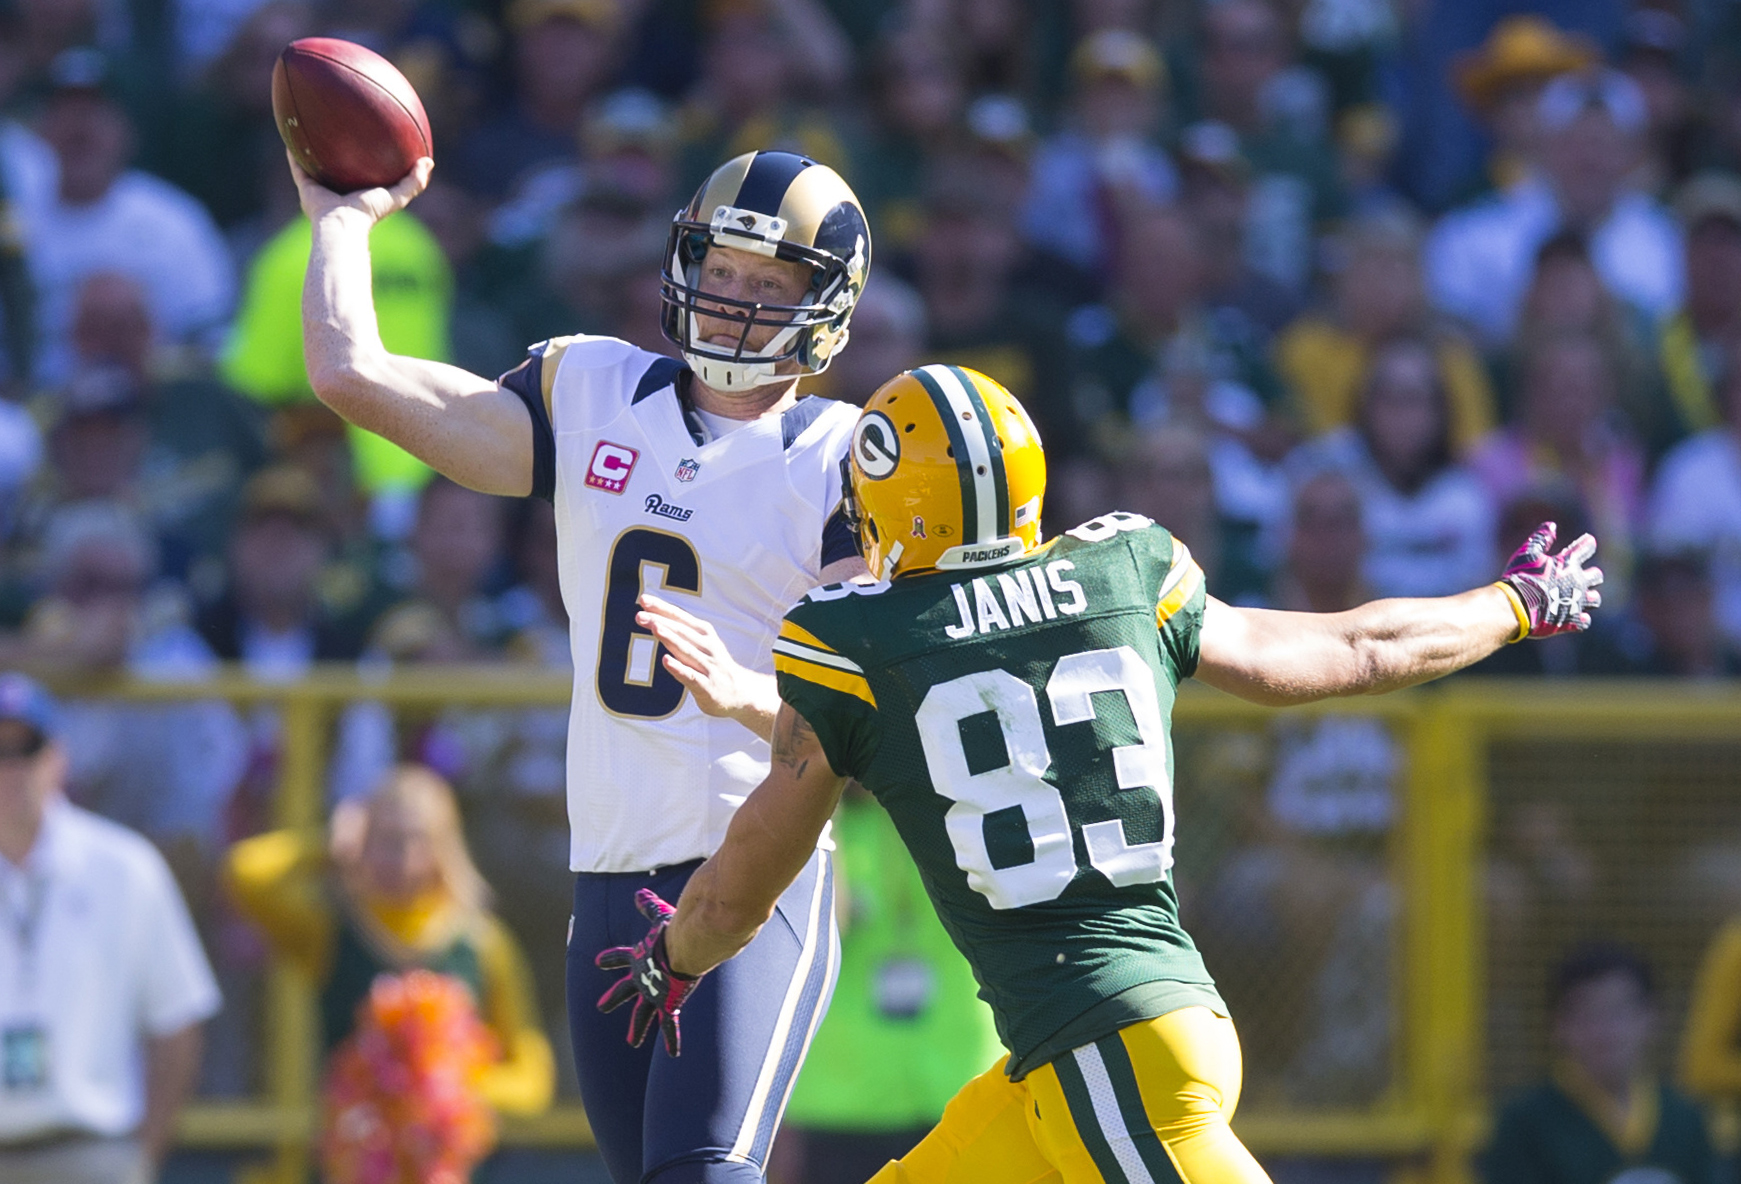 NFL: St. Louis Rams at Green Bay Packers